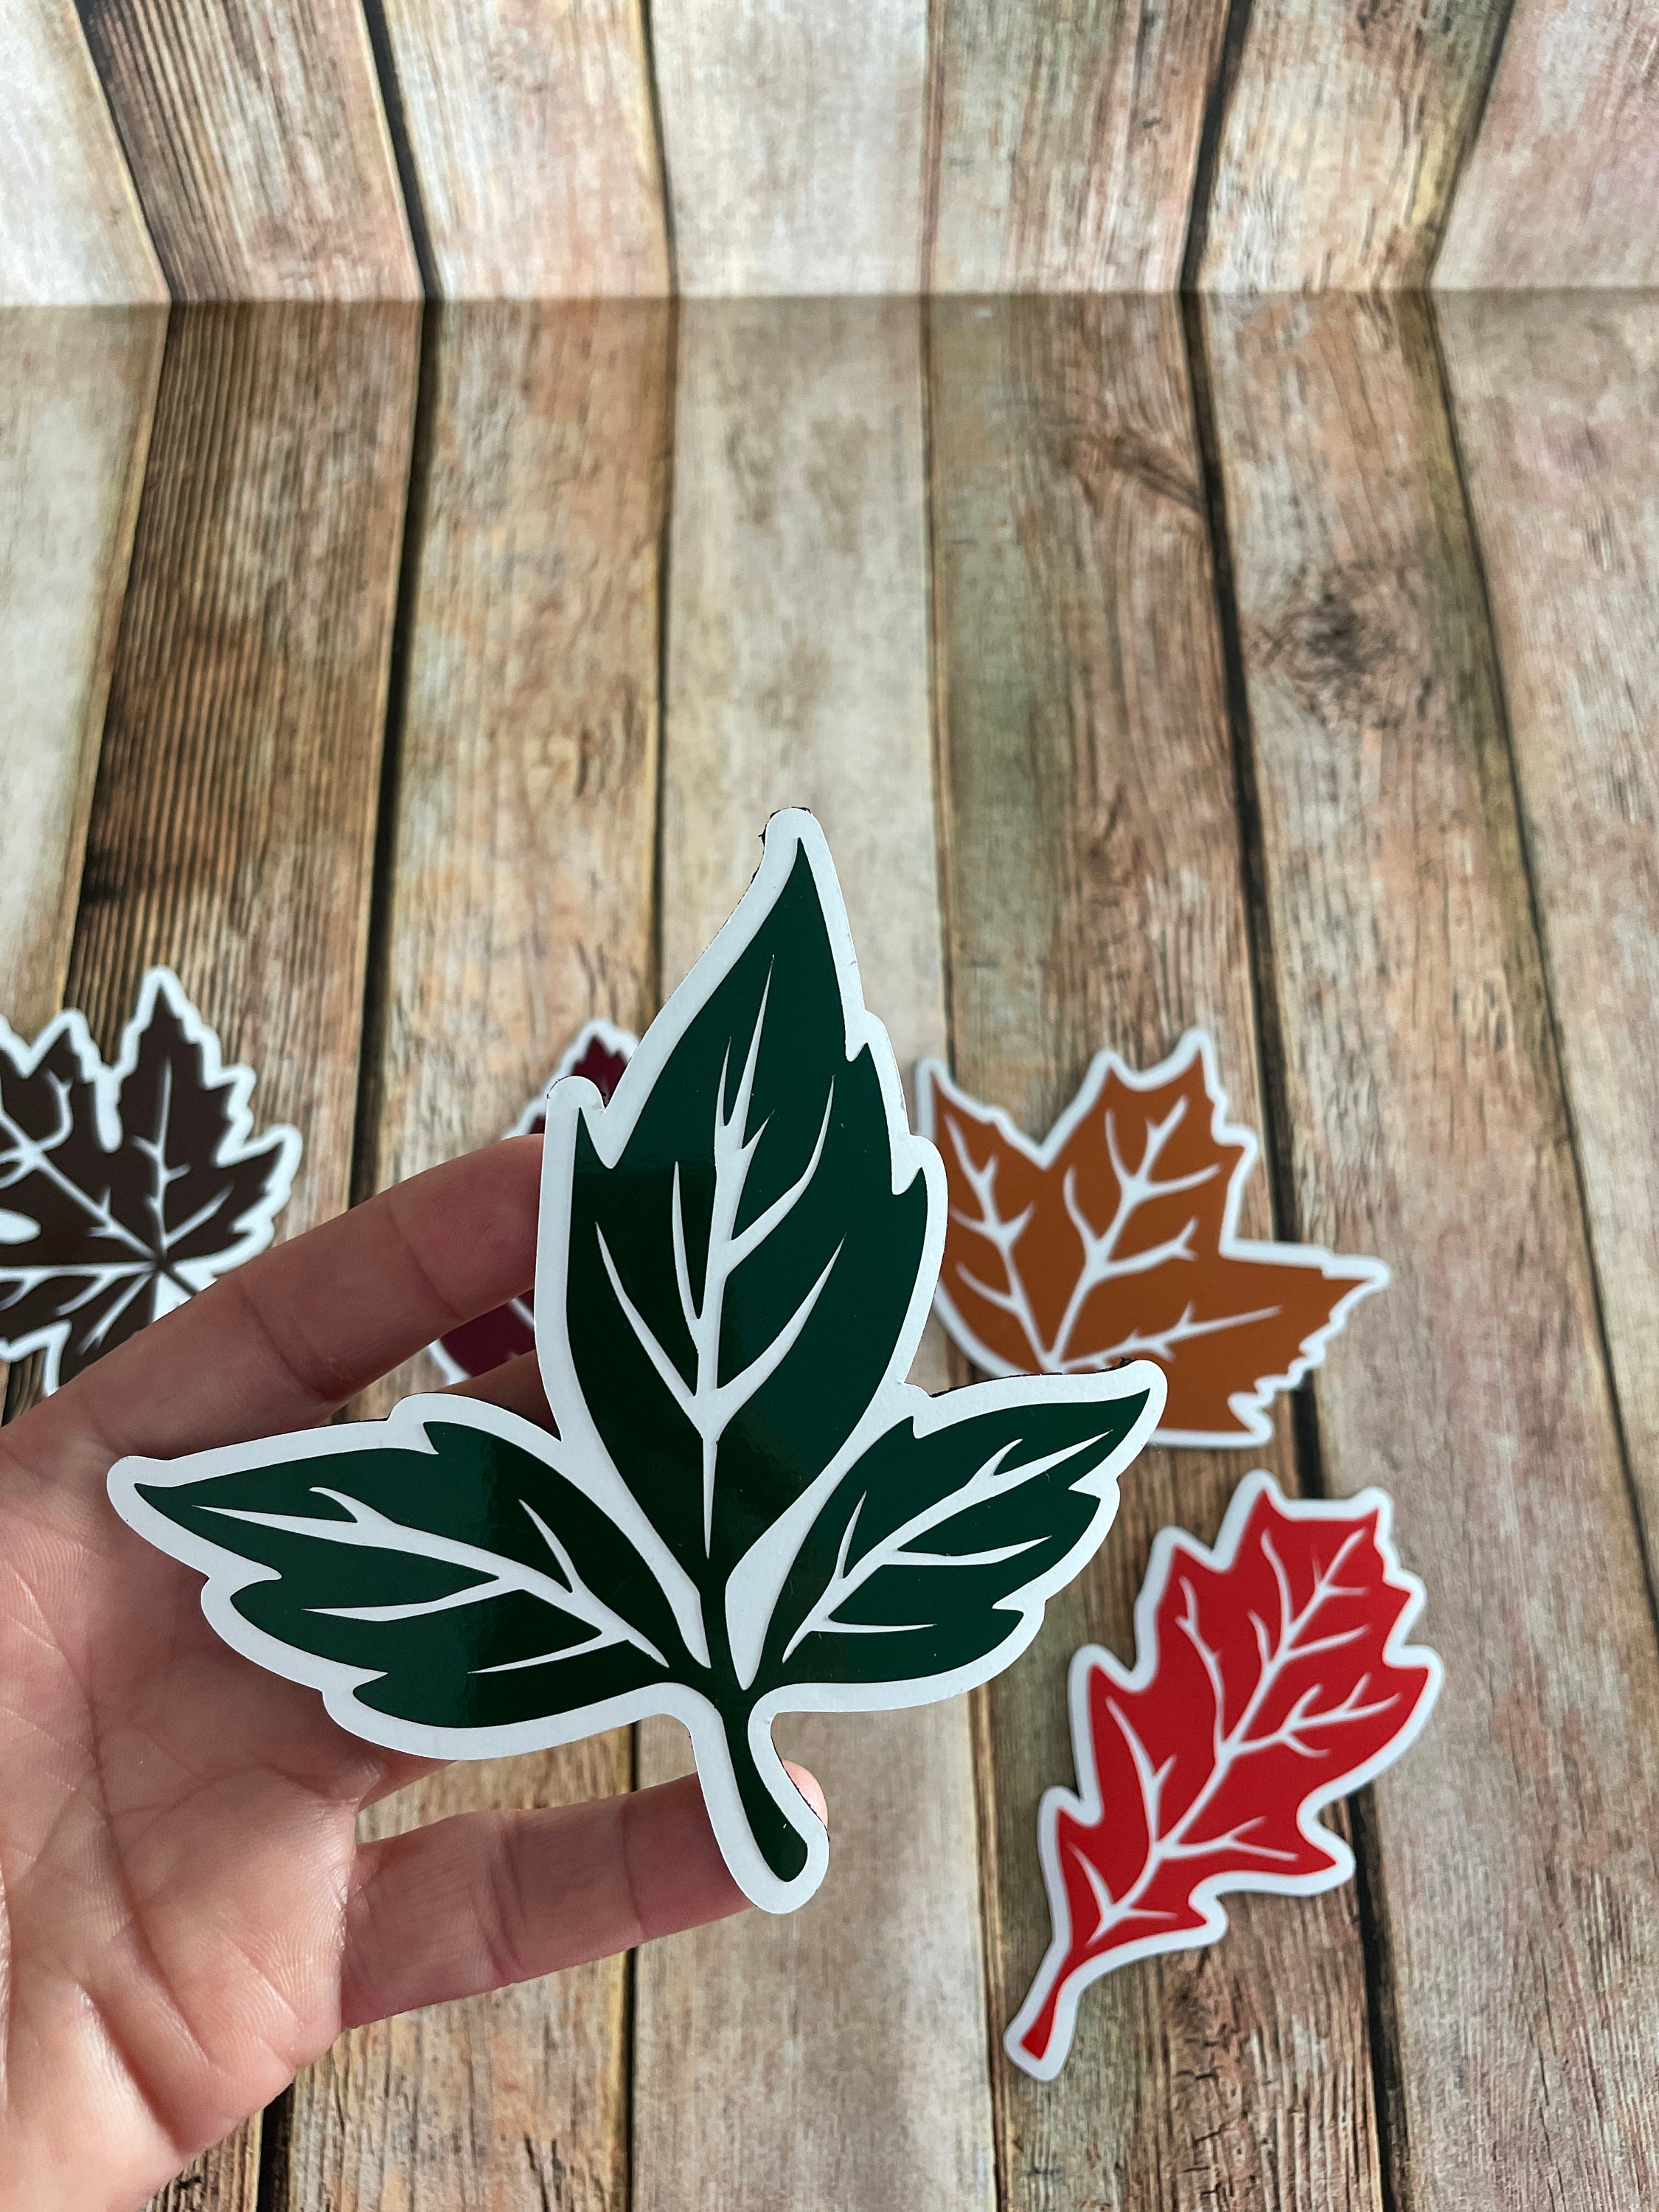 Fall Leaf 1″ Round Glass Magnets (Set of 6)